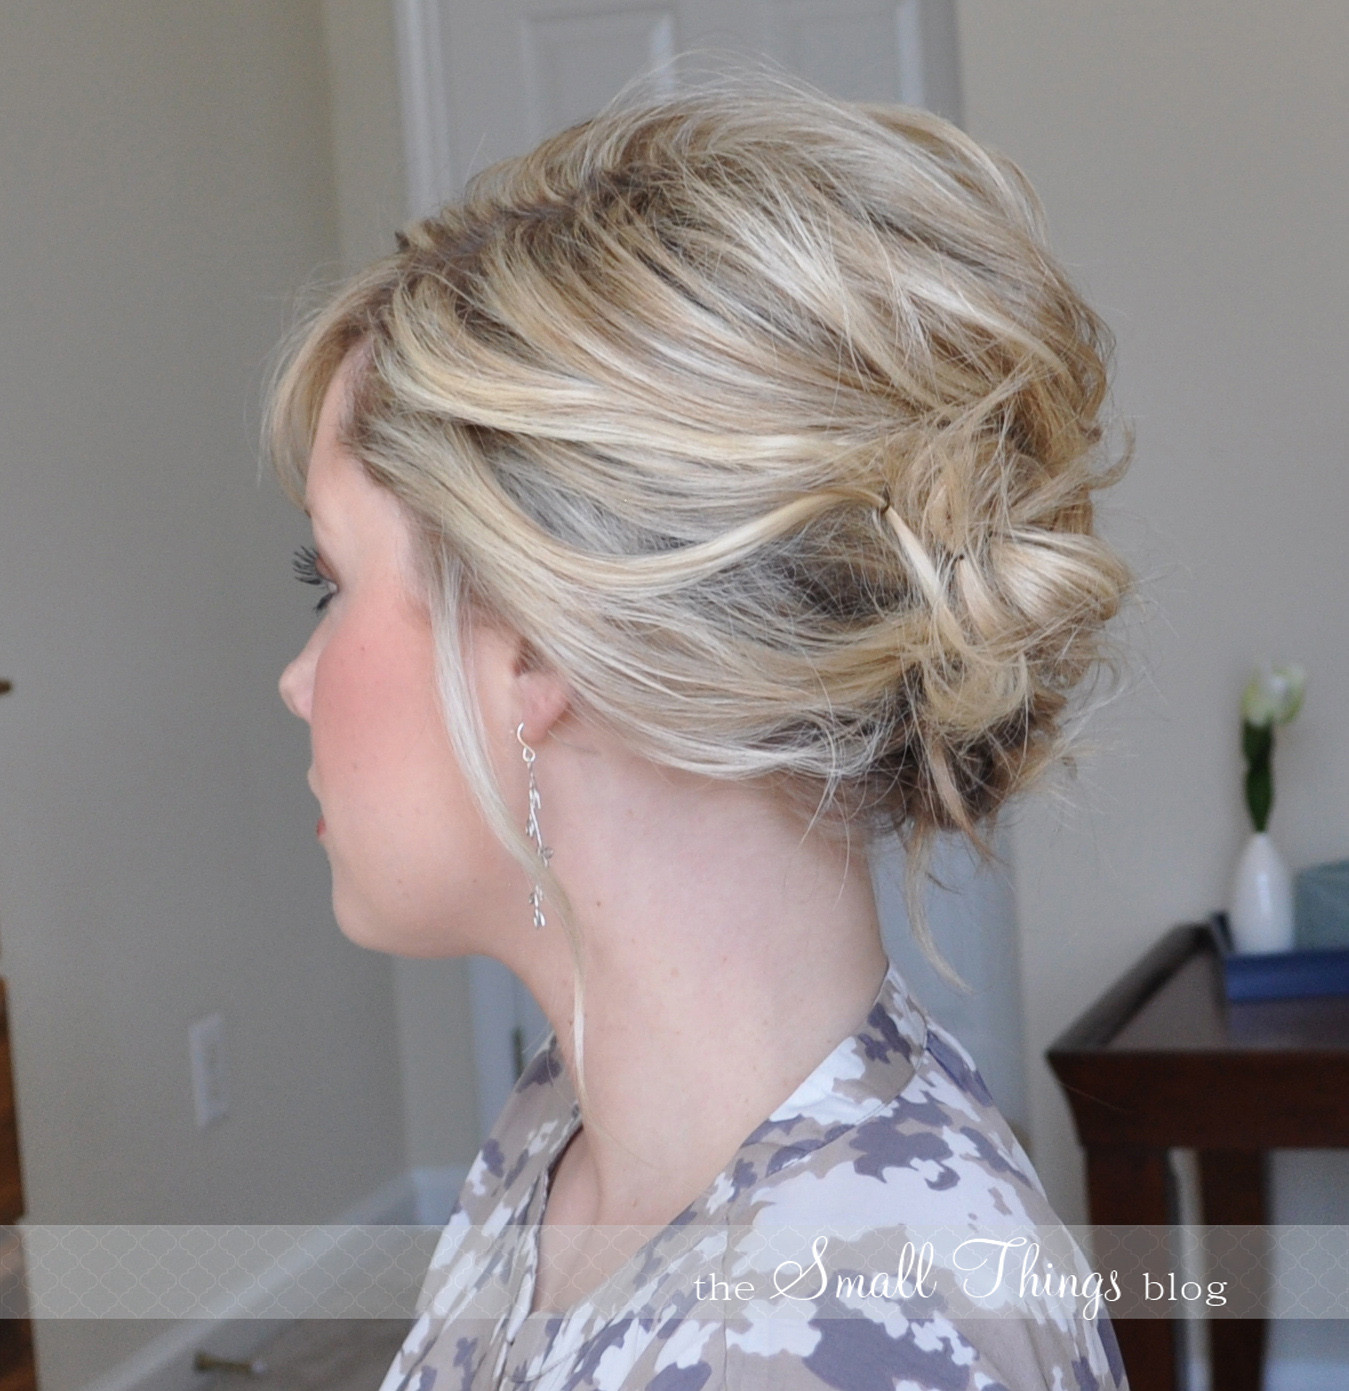 Messy Updo Hairstyles For Medium Length Hair
 The Messy Side Updo – The Small Things Blog